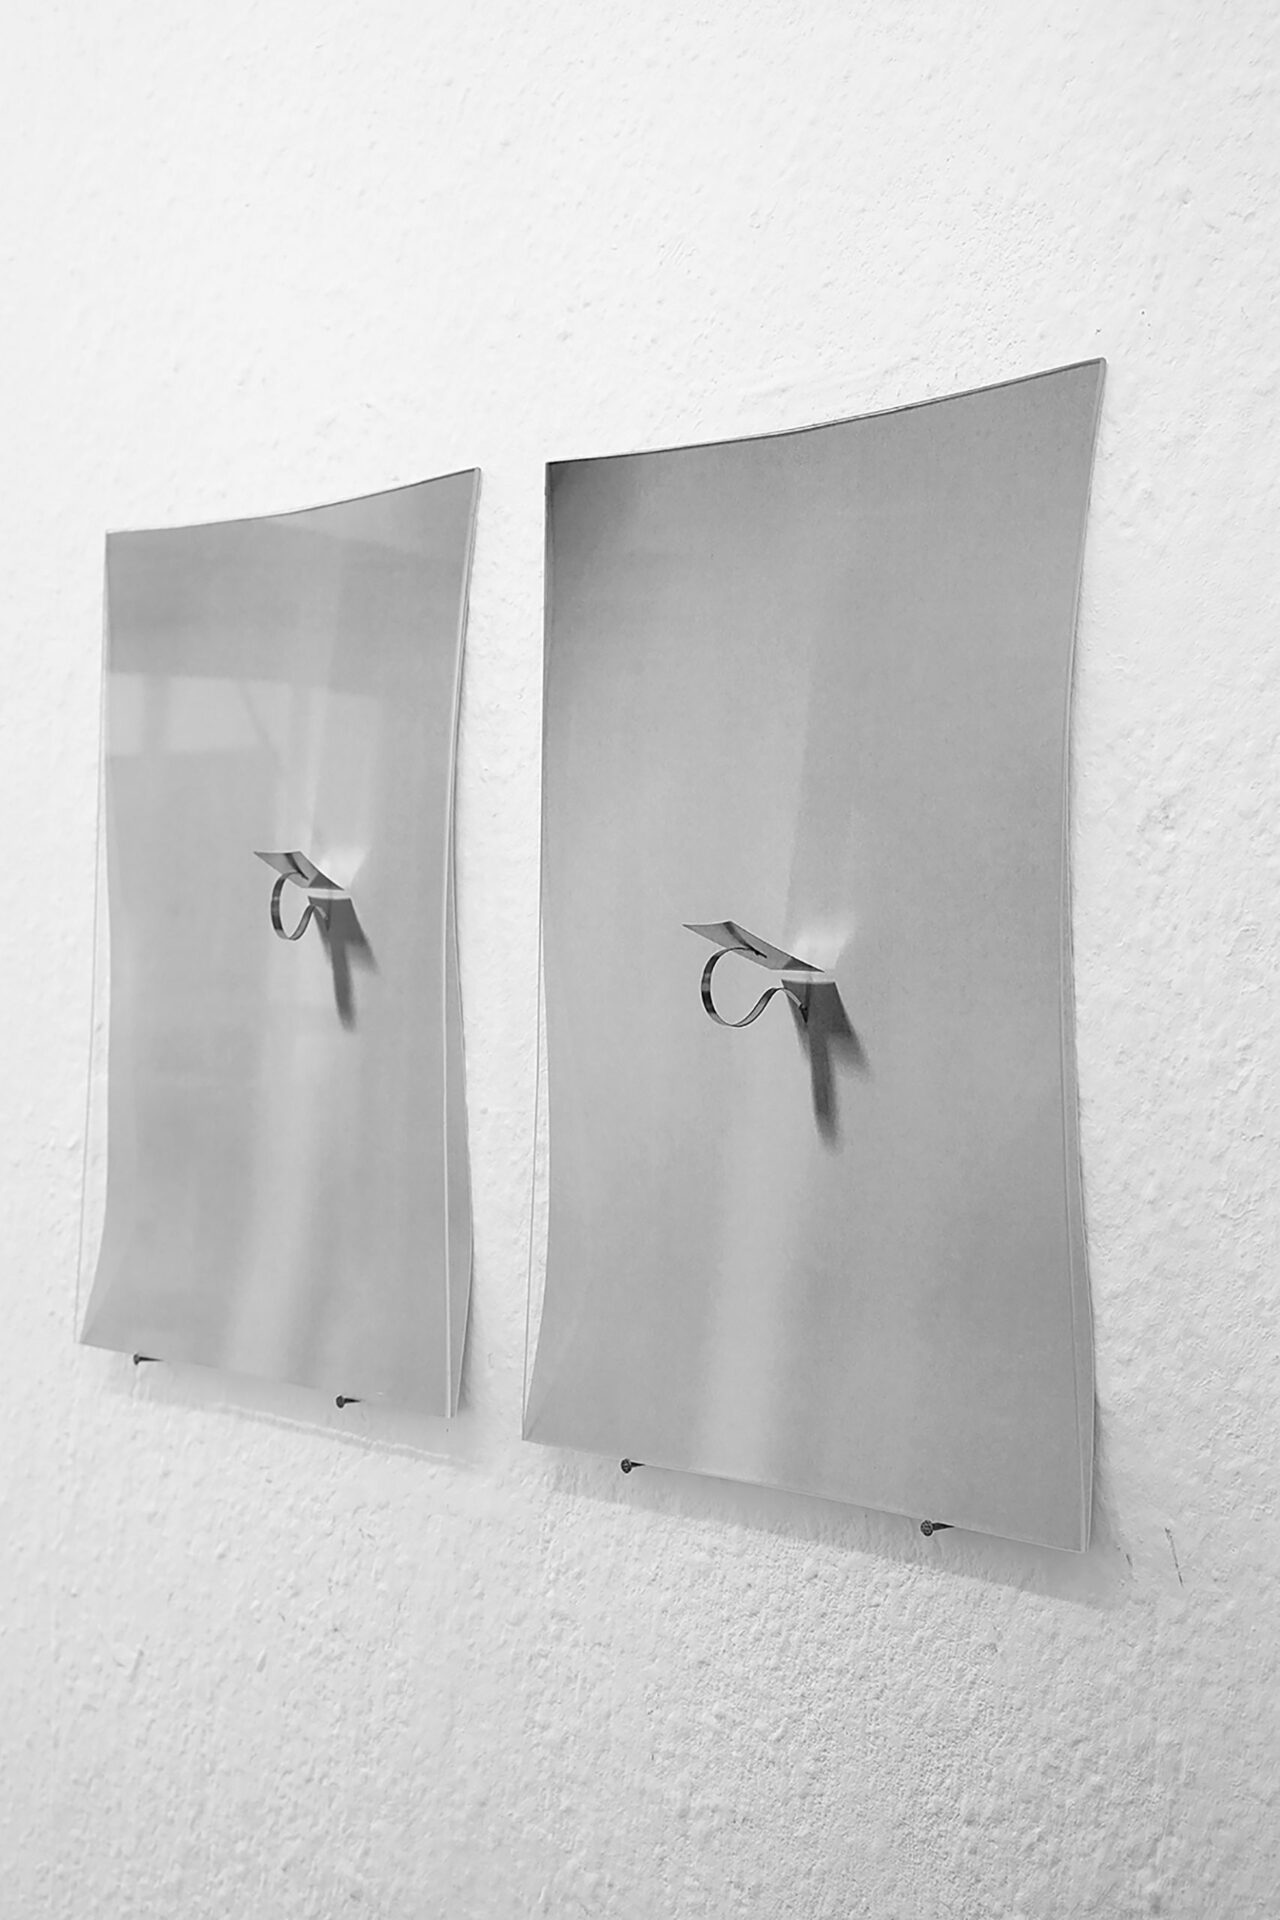 Mika Schwarz, from: Two partners are dancing out on a big floor–and nobody leads, 2021, 2 laser prints, anti-reflective glass, approx. 22.5 x 32 cm